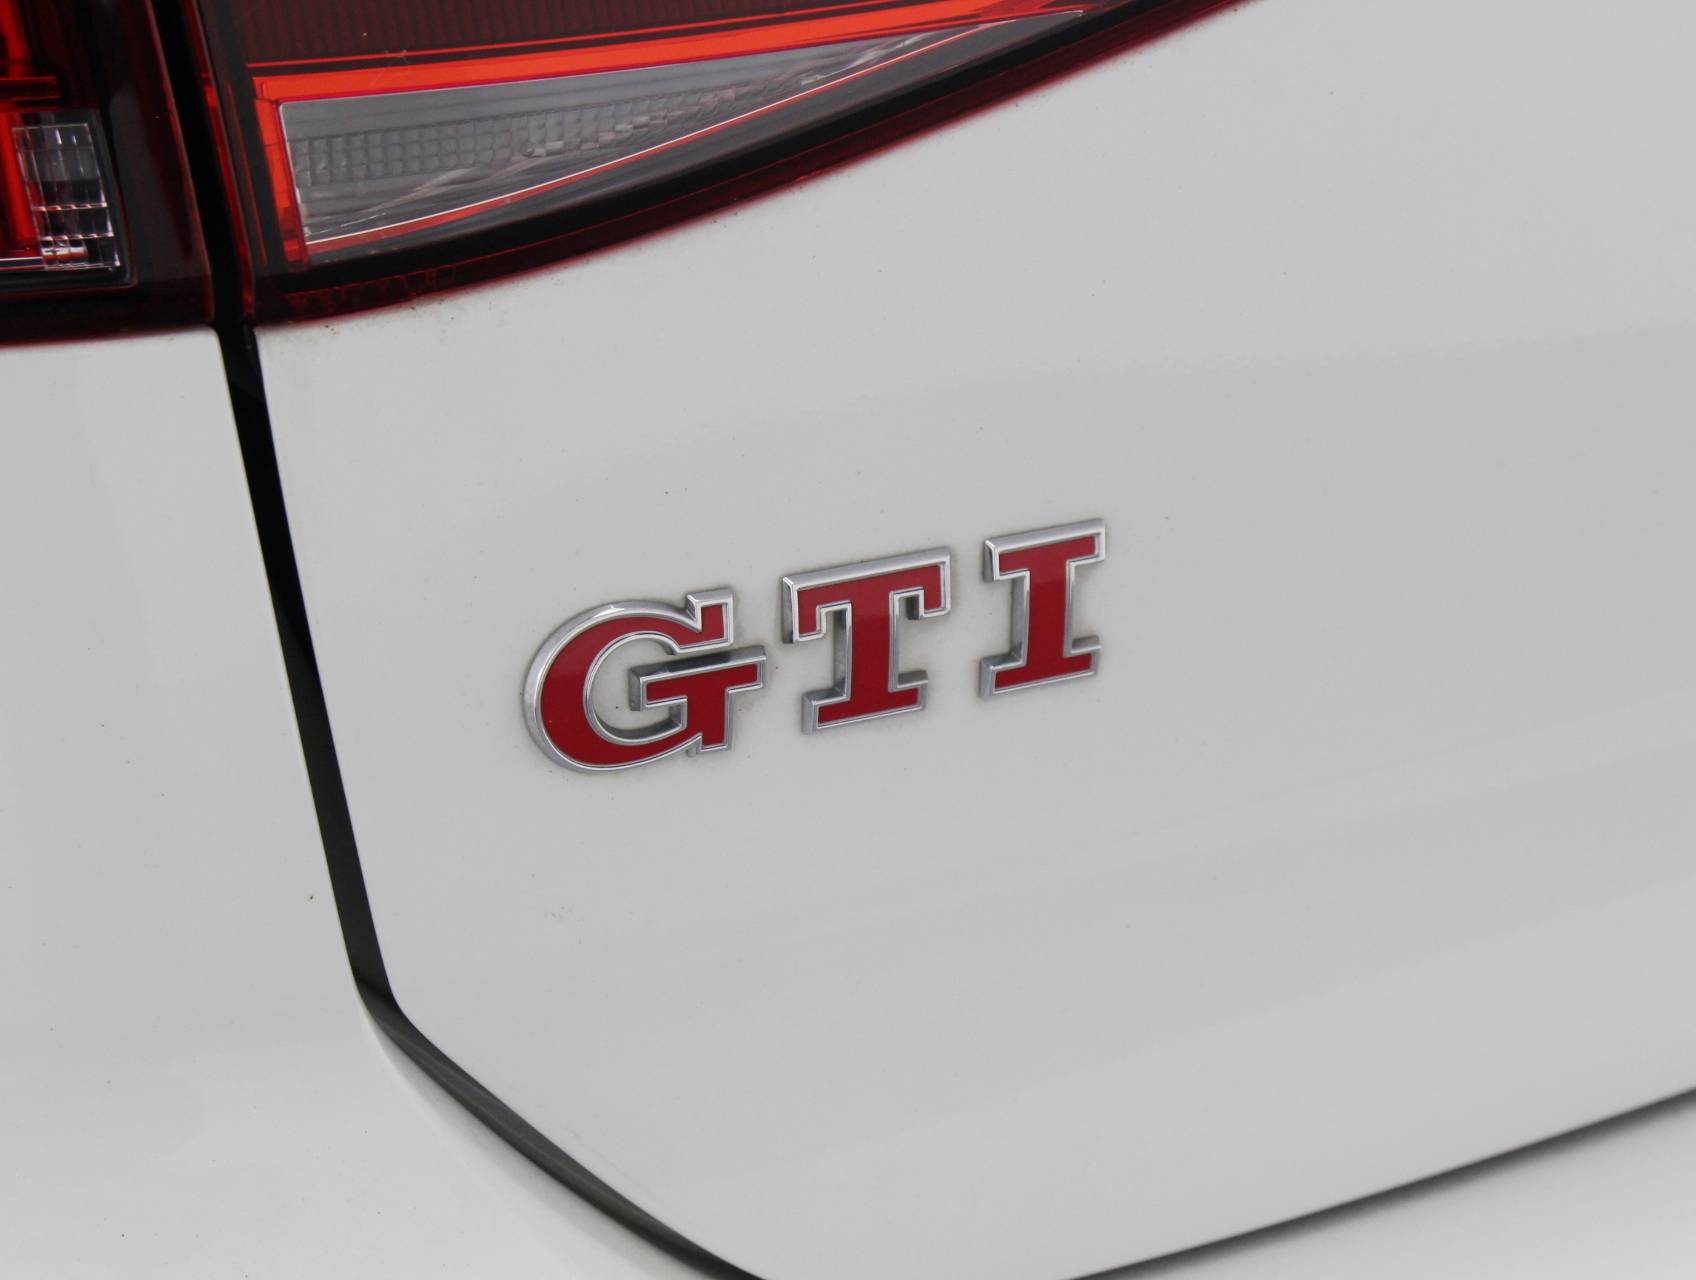 Florida Fine Cars - Used VOLKSWAGEN GTI 2016 WEST PALM Autobahn Performance